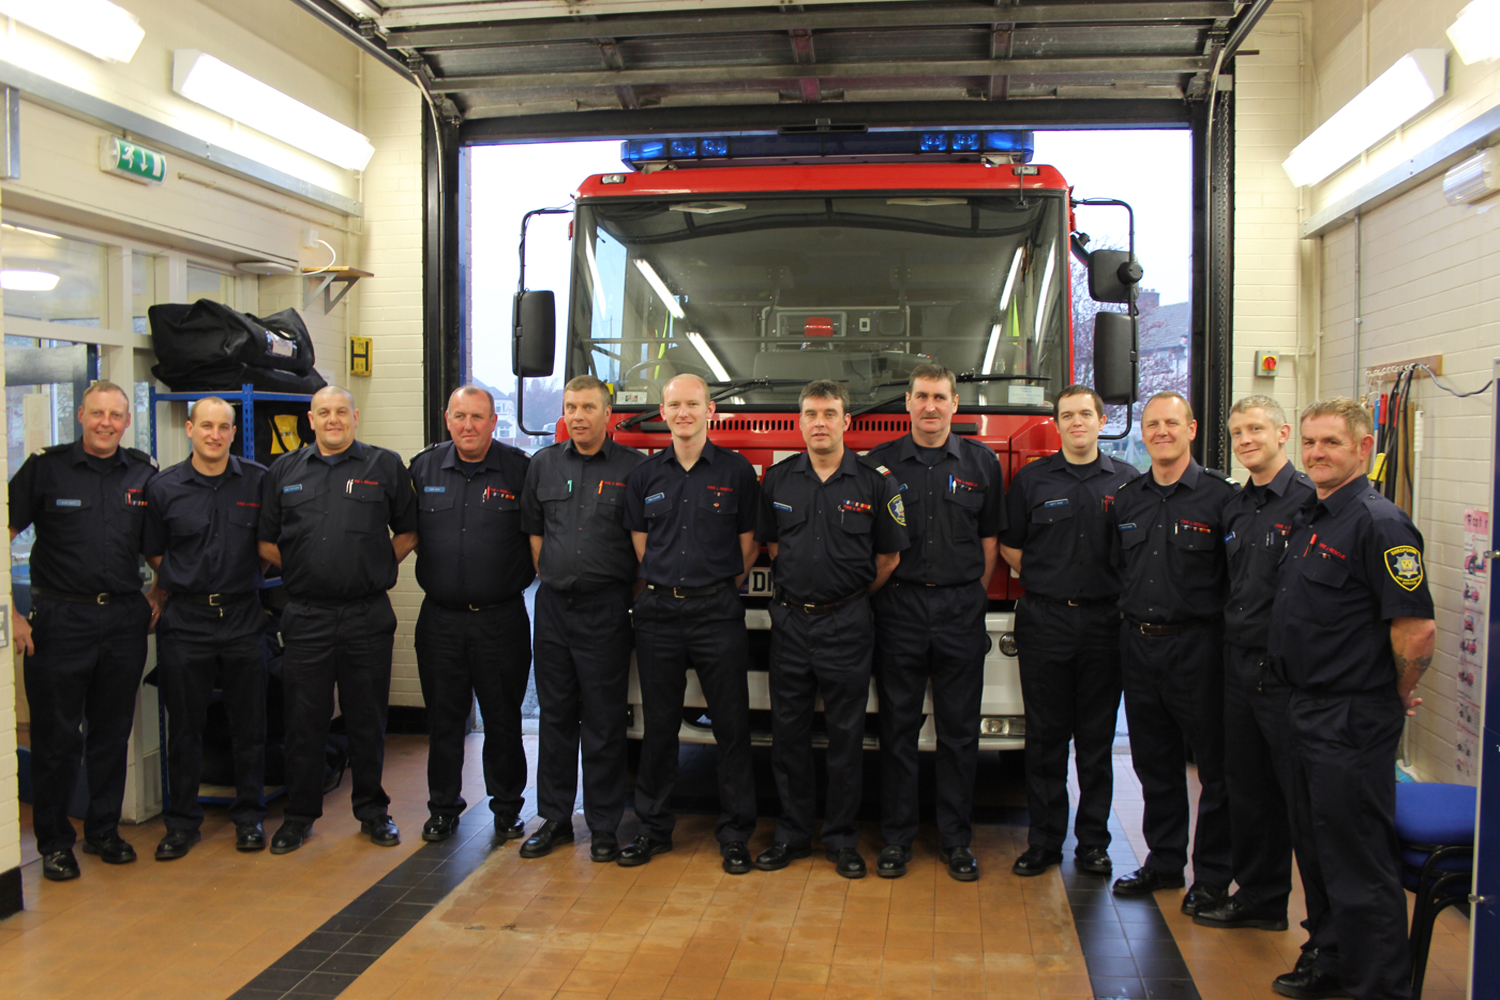 Watch Manager Tony Peck (far left)is in charge of Prees Fire Station and has been an “on call” firefighter for nearly 32 years. He is pictured with his crew.